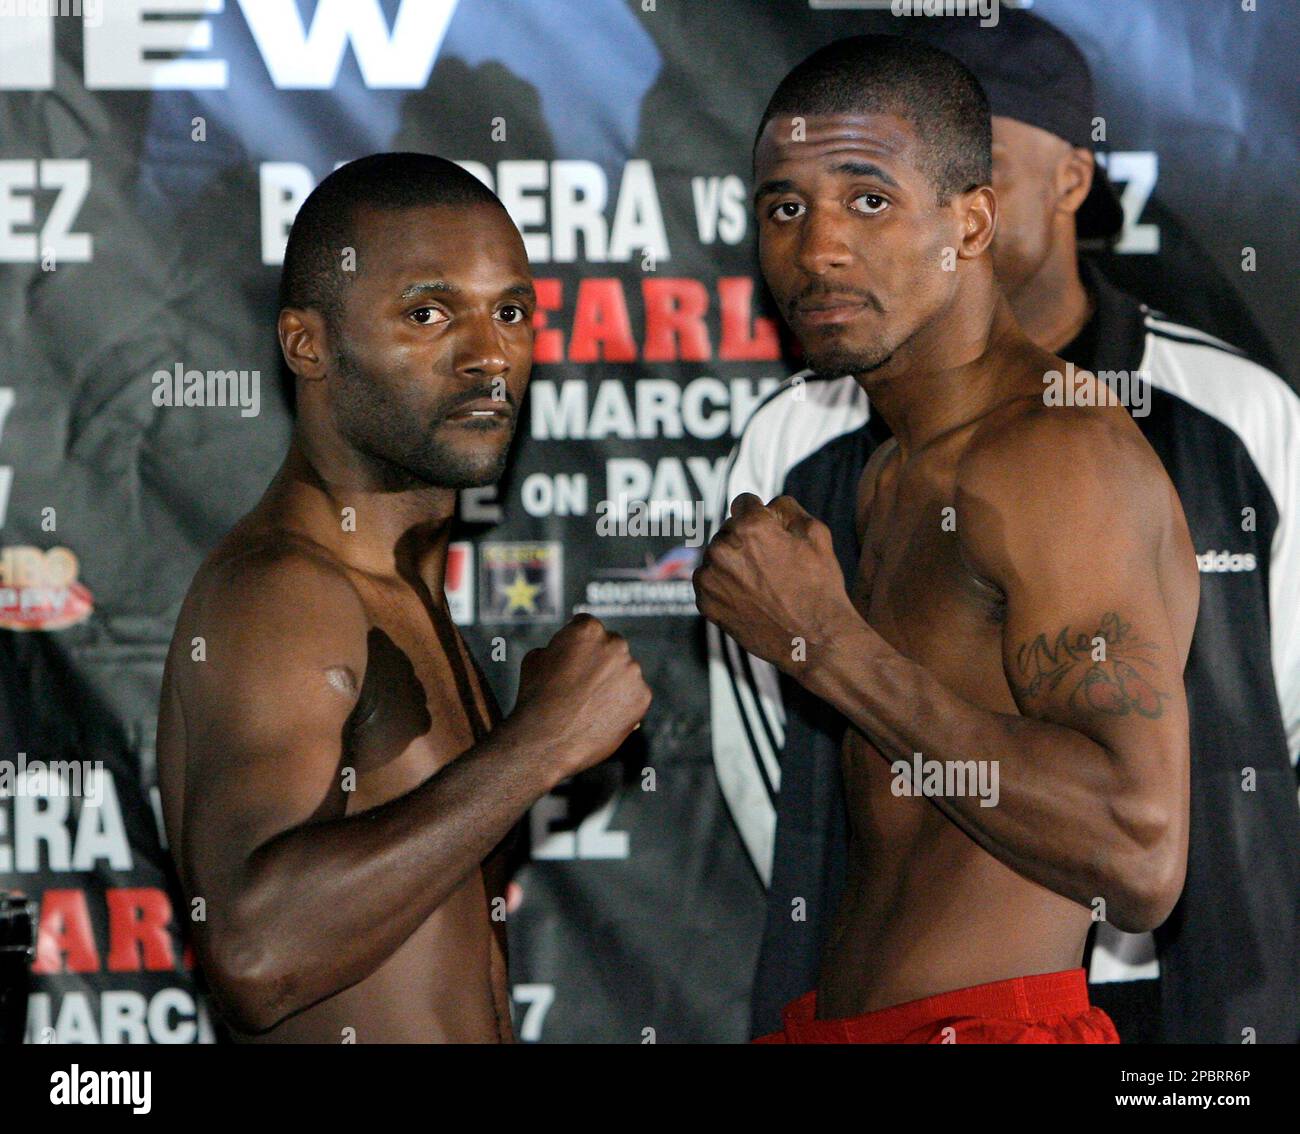 Demetrius Hopkins, right, poses for photos with Steve Forbes during an  official weigh-in ceremony in Las Vegas on Friday, March 16, 2007. The pair  will fight in a Jr. welterweight boxing match